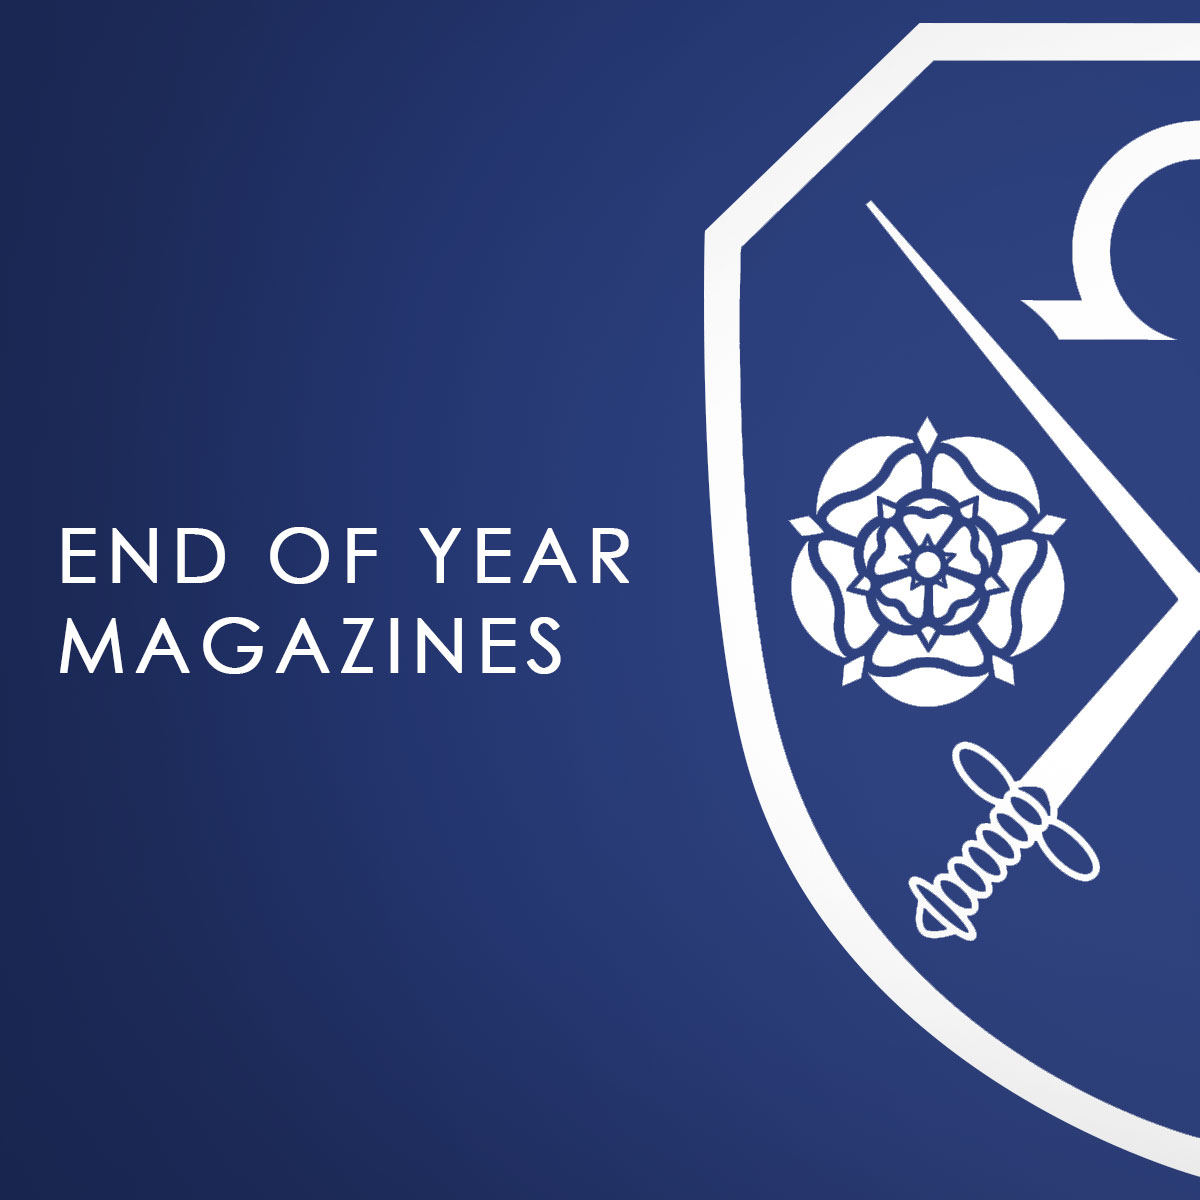 A blue background with the East Barnet School logo which says End of Year Magazines